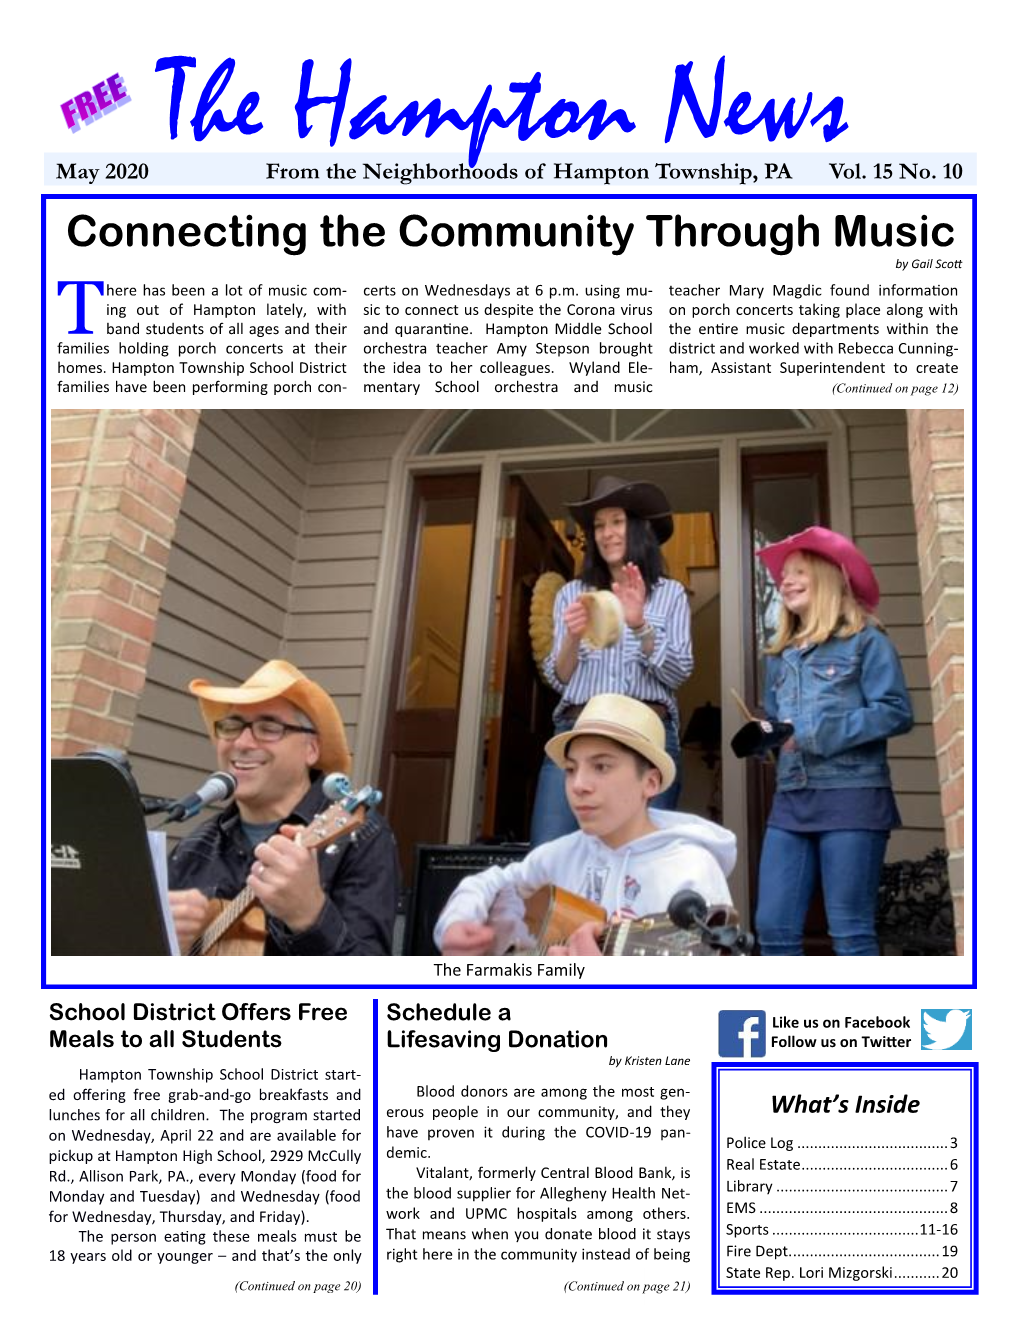 Connecting the Community Through Music